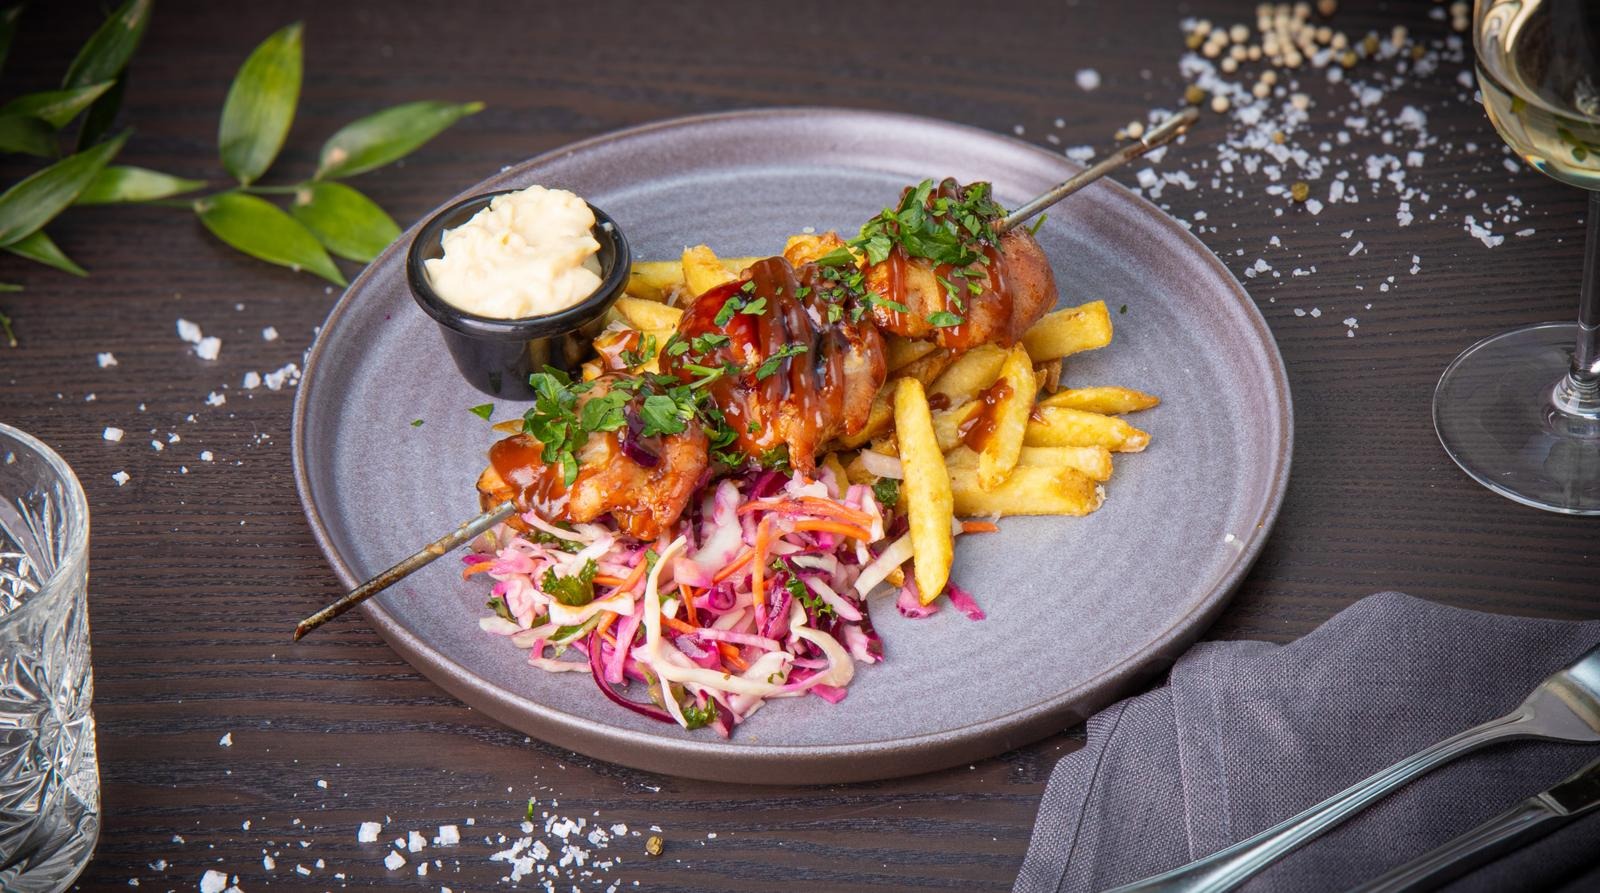 Charcoal-grilled chicken skewer, BBQ-sauce flavored with Jaloviina, coleslaw, Mustakari’s country fries with Parmesan cheese and lemon aioli